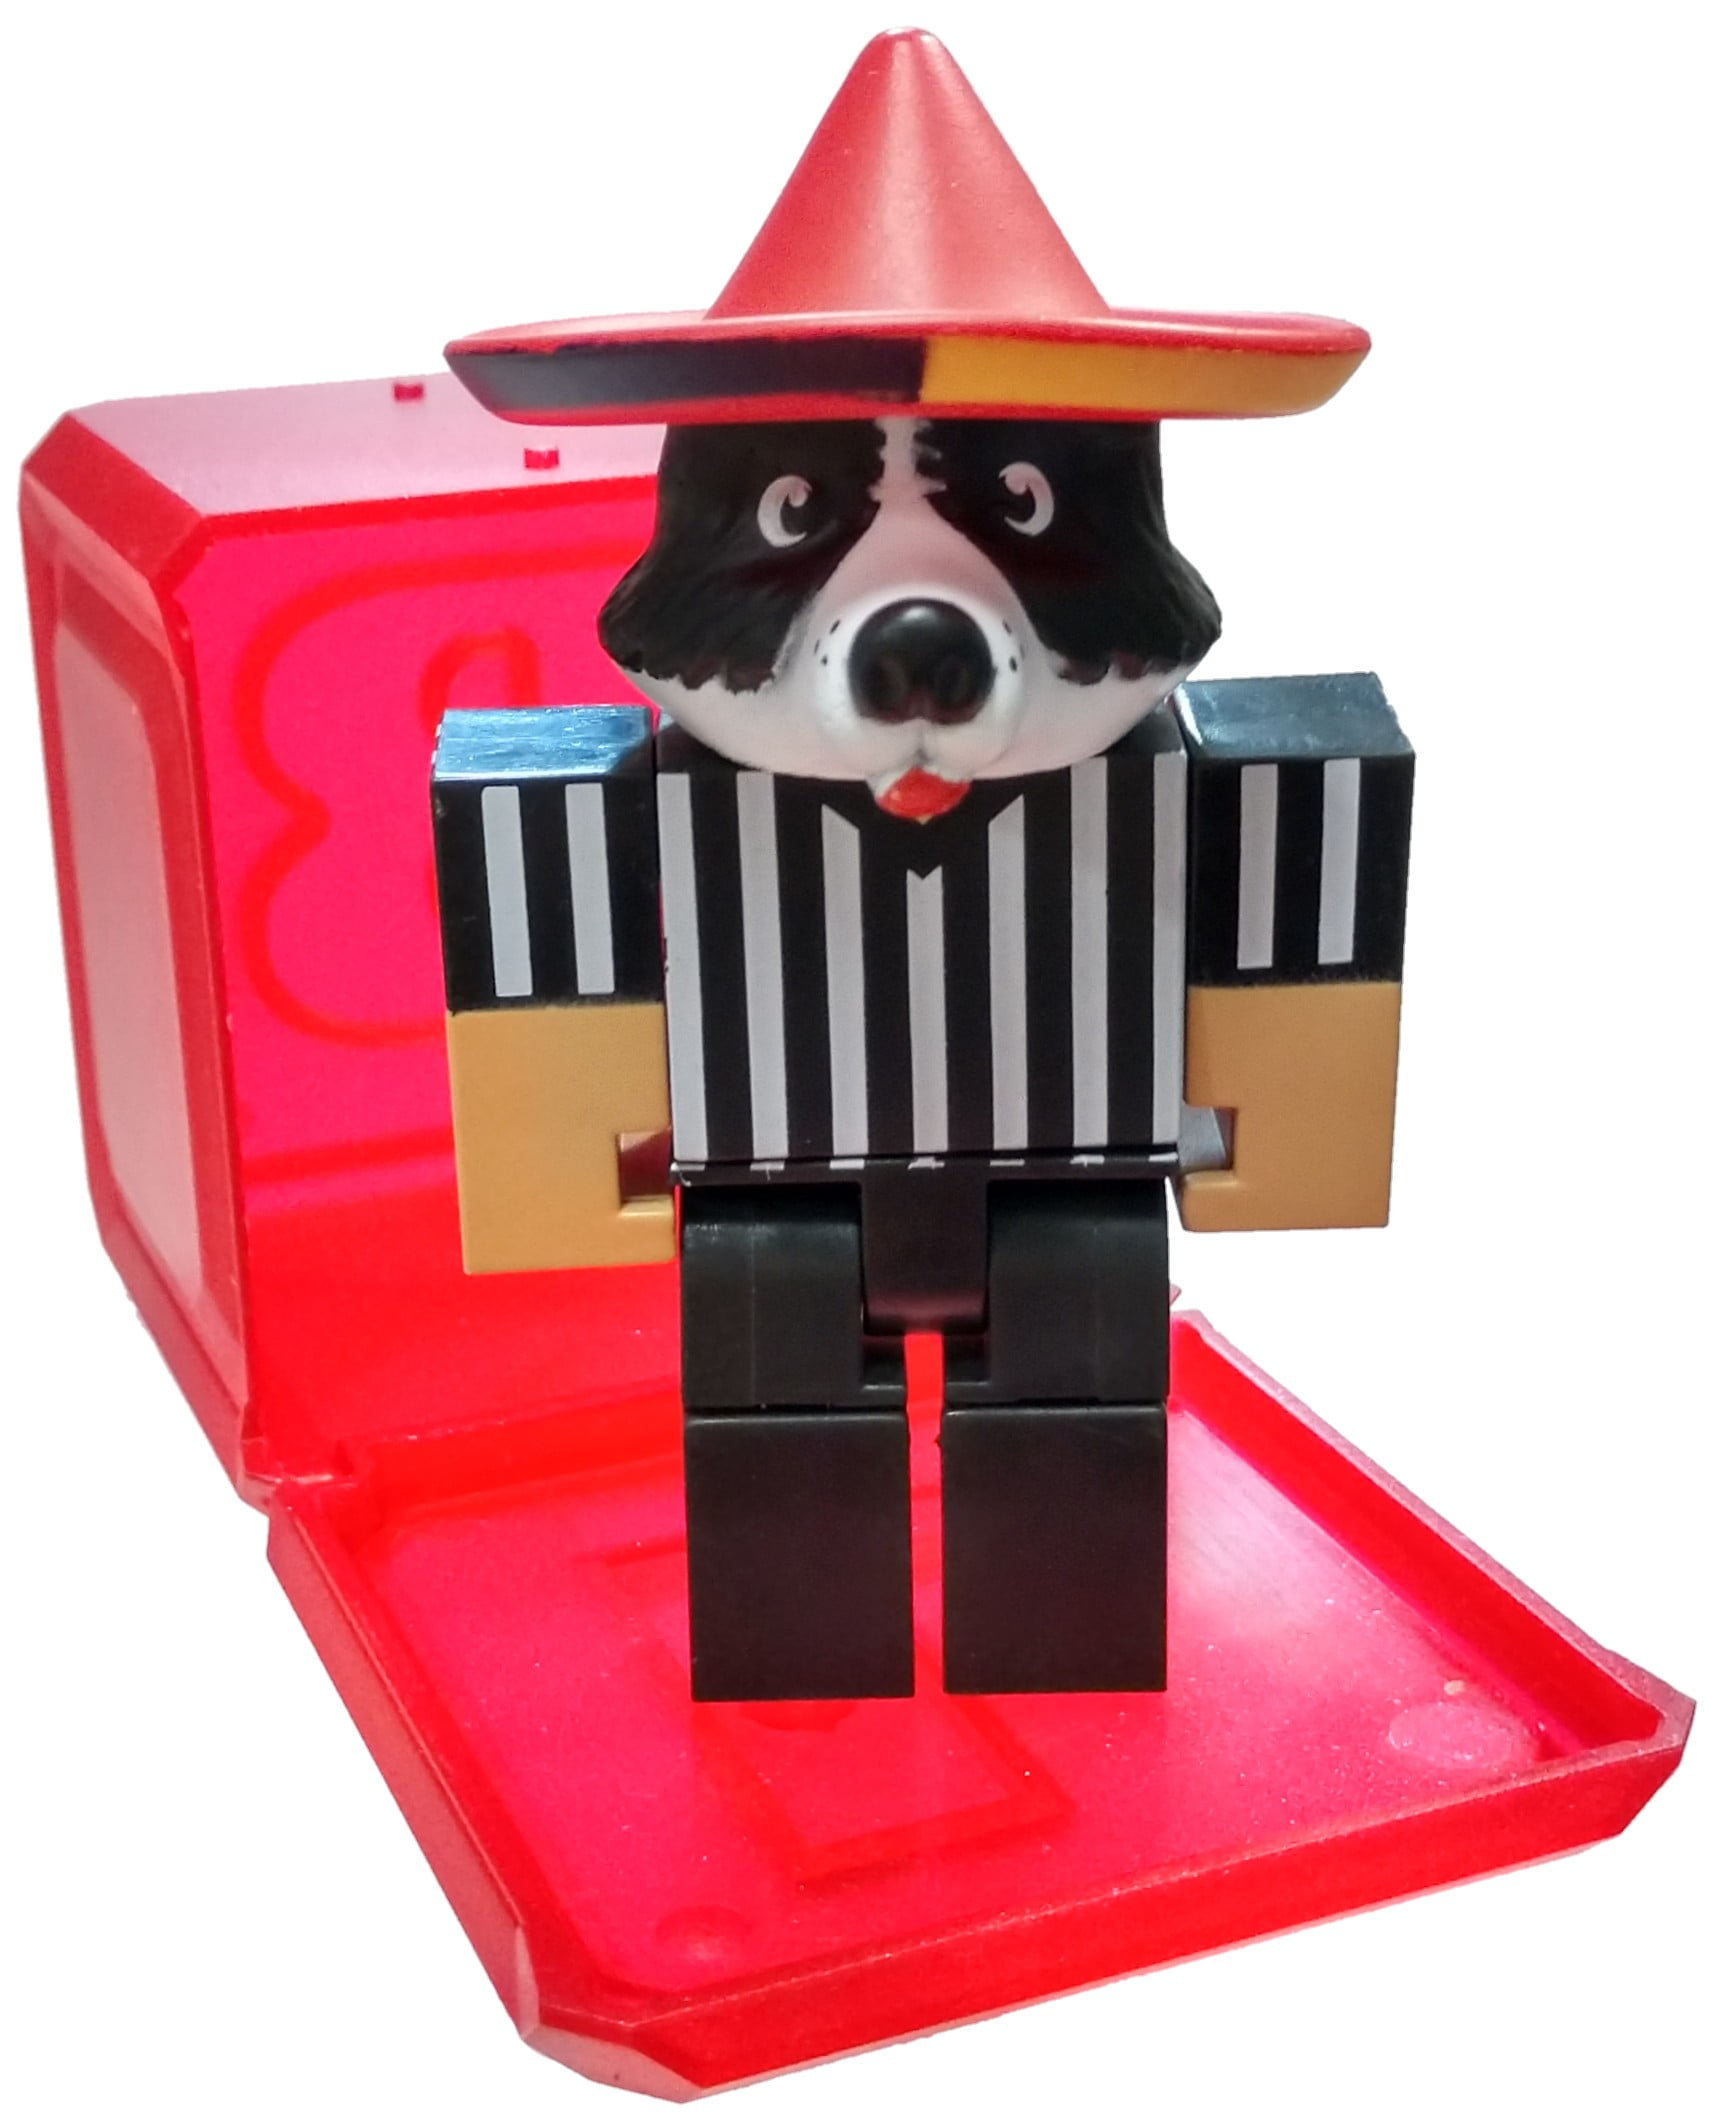 Roblox Celebrity Collection Series 5 High School Life Referee Mini Figure With Red Cube And Online Code No Packaging Walmart Com Walmart Com - high school dorm life moved roblox